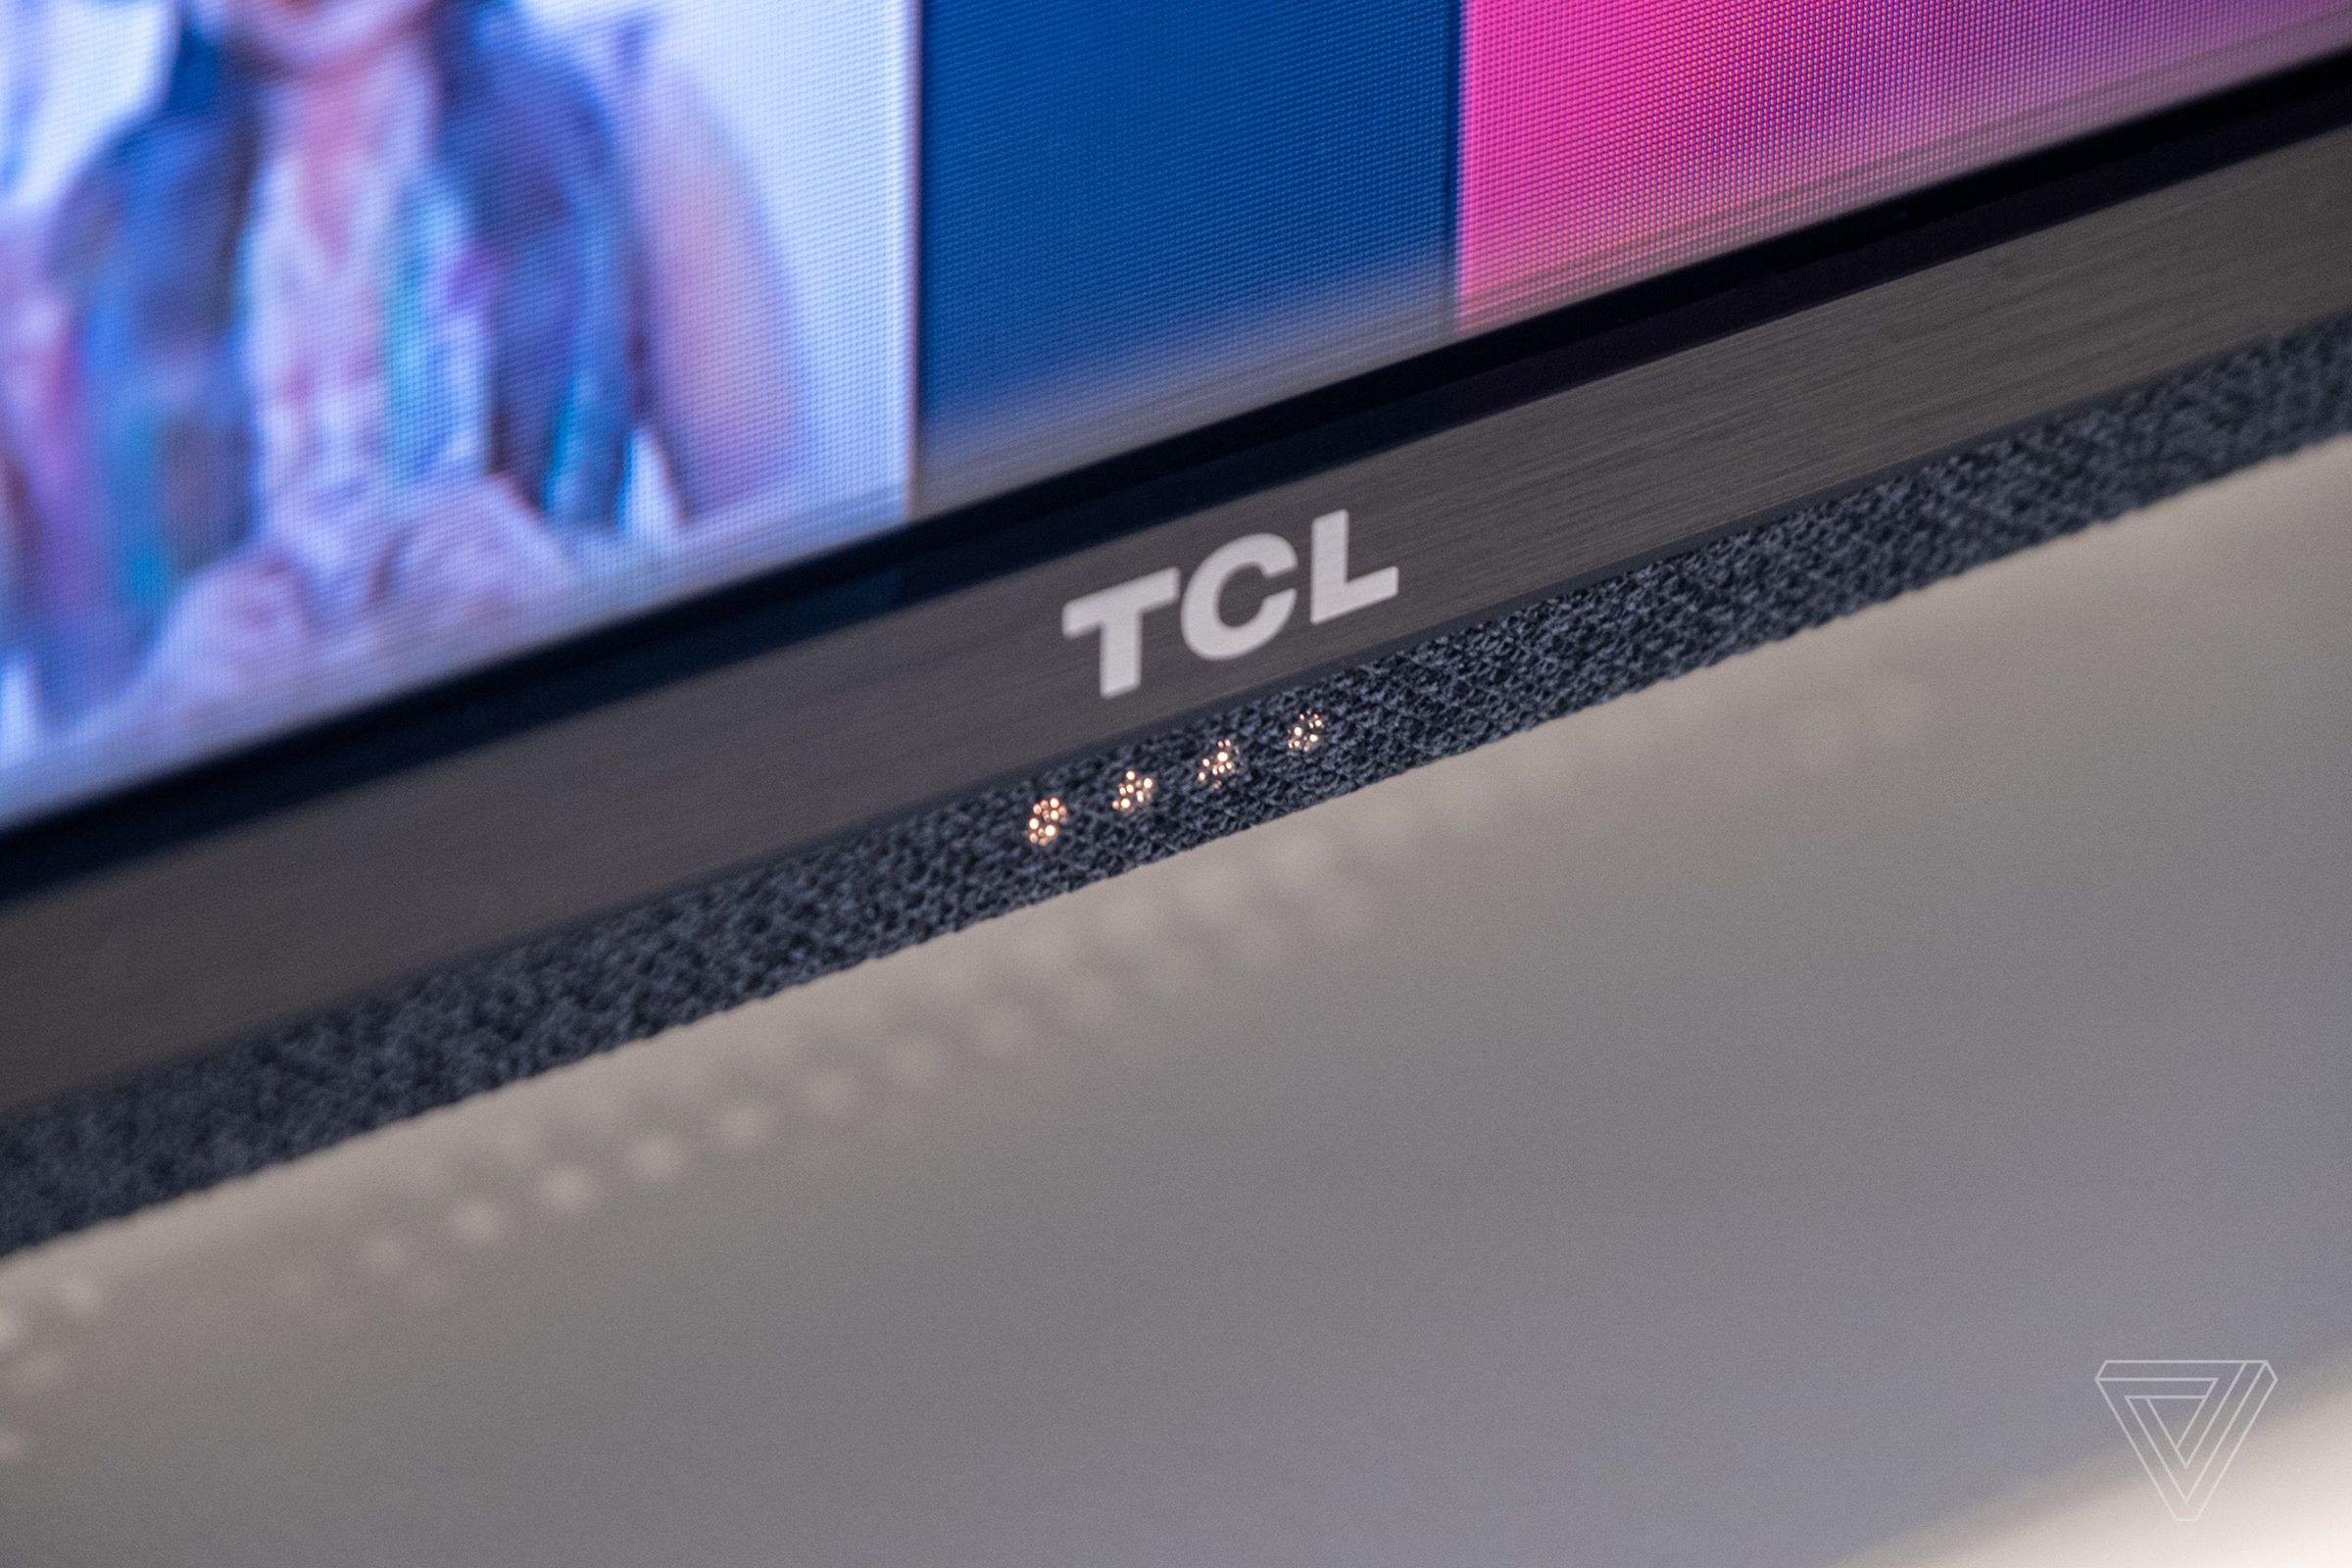 TCL’s Google TVs have always-listening mics located at the bottom of the screen.